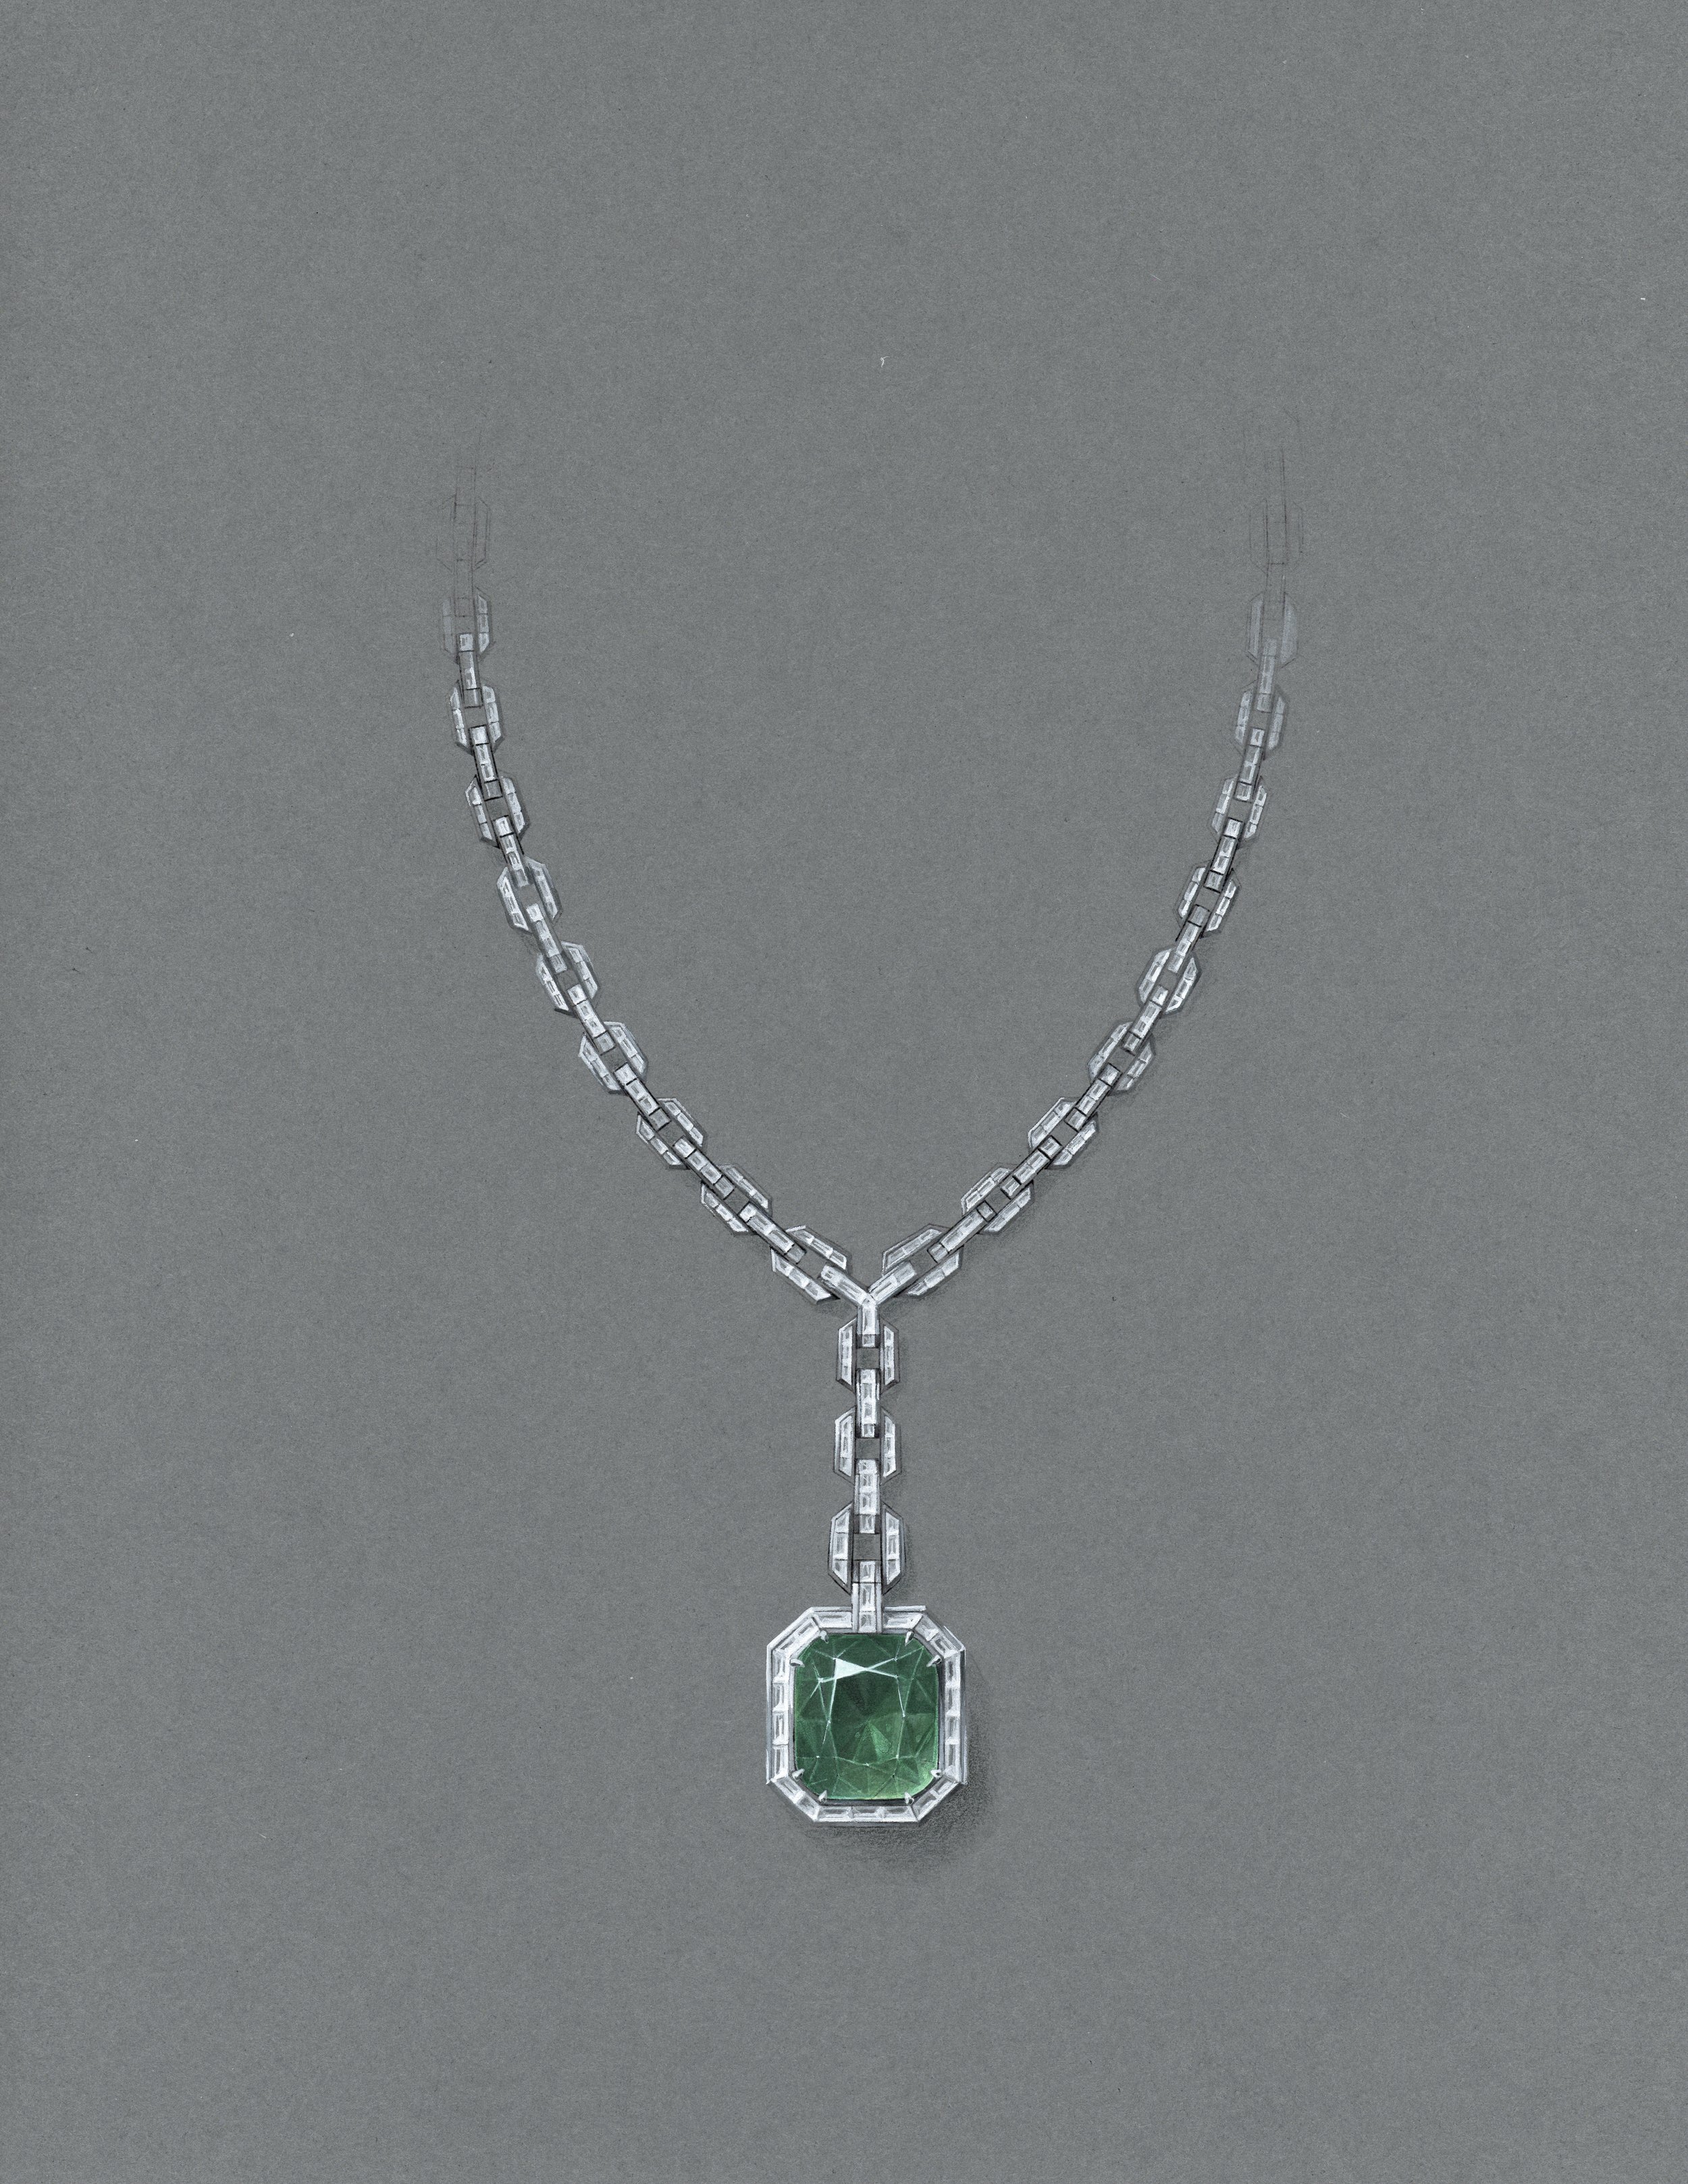  Gouache painting of a 32ct emerald pendant necklace with white diamonds in 18k white gold. 